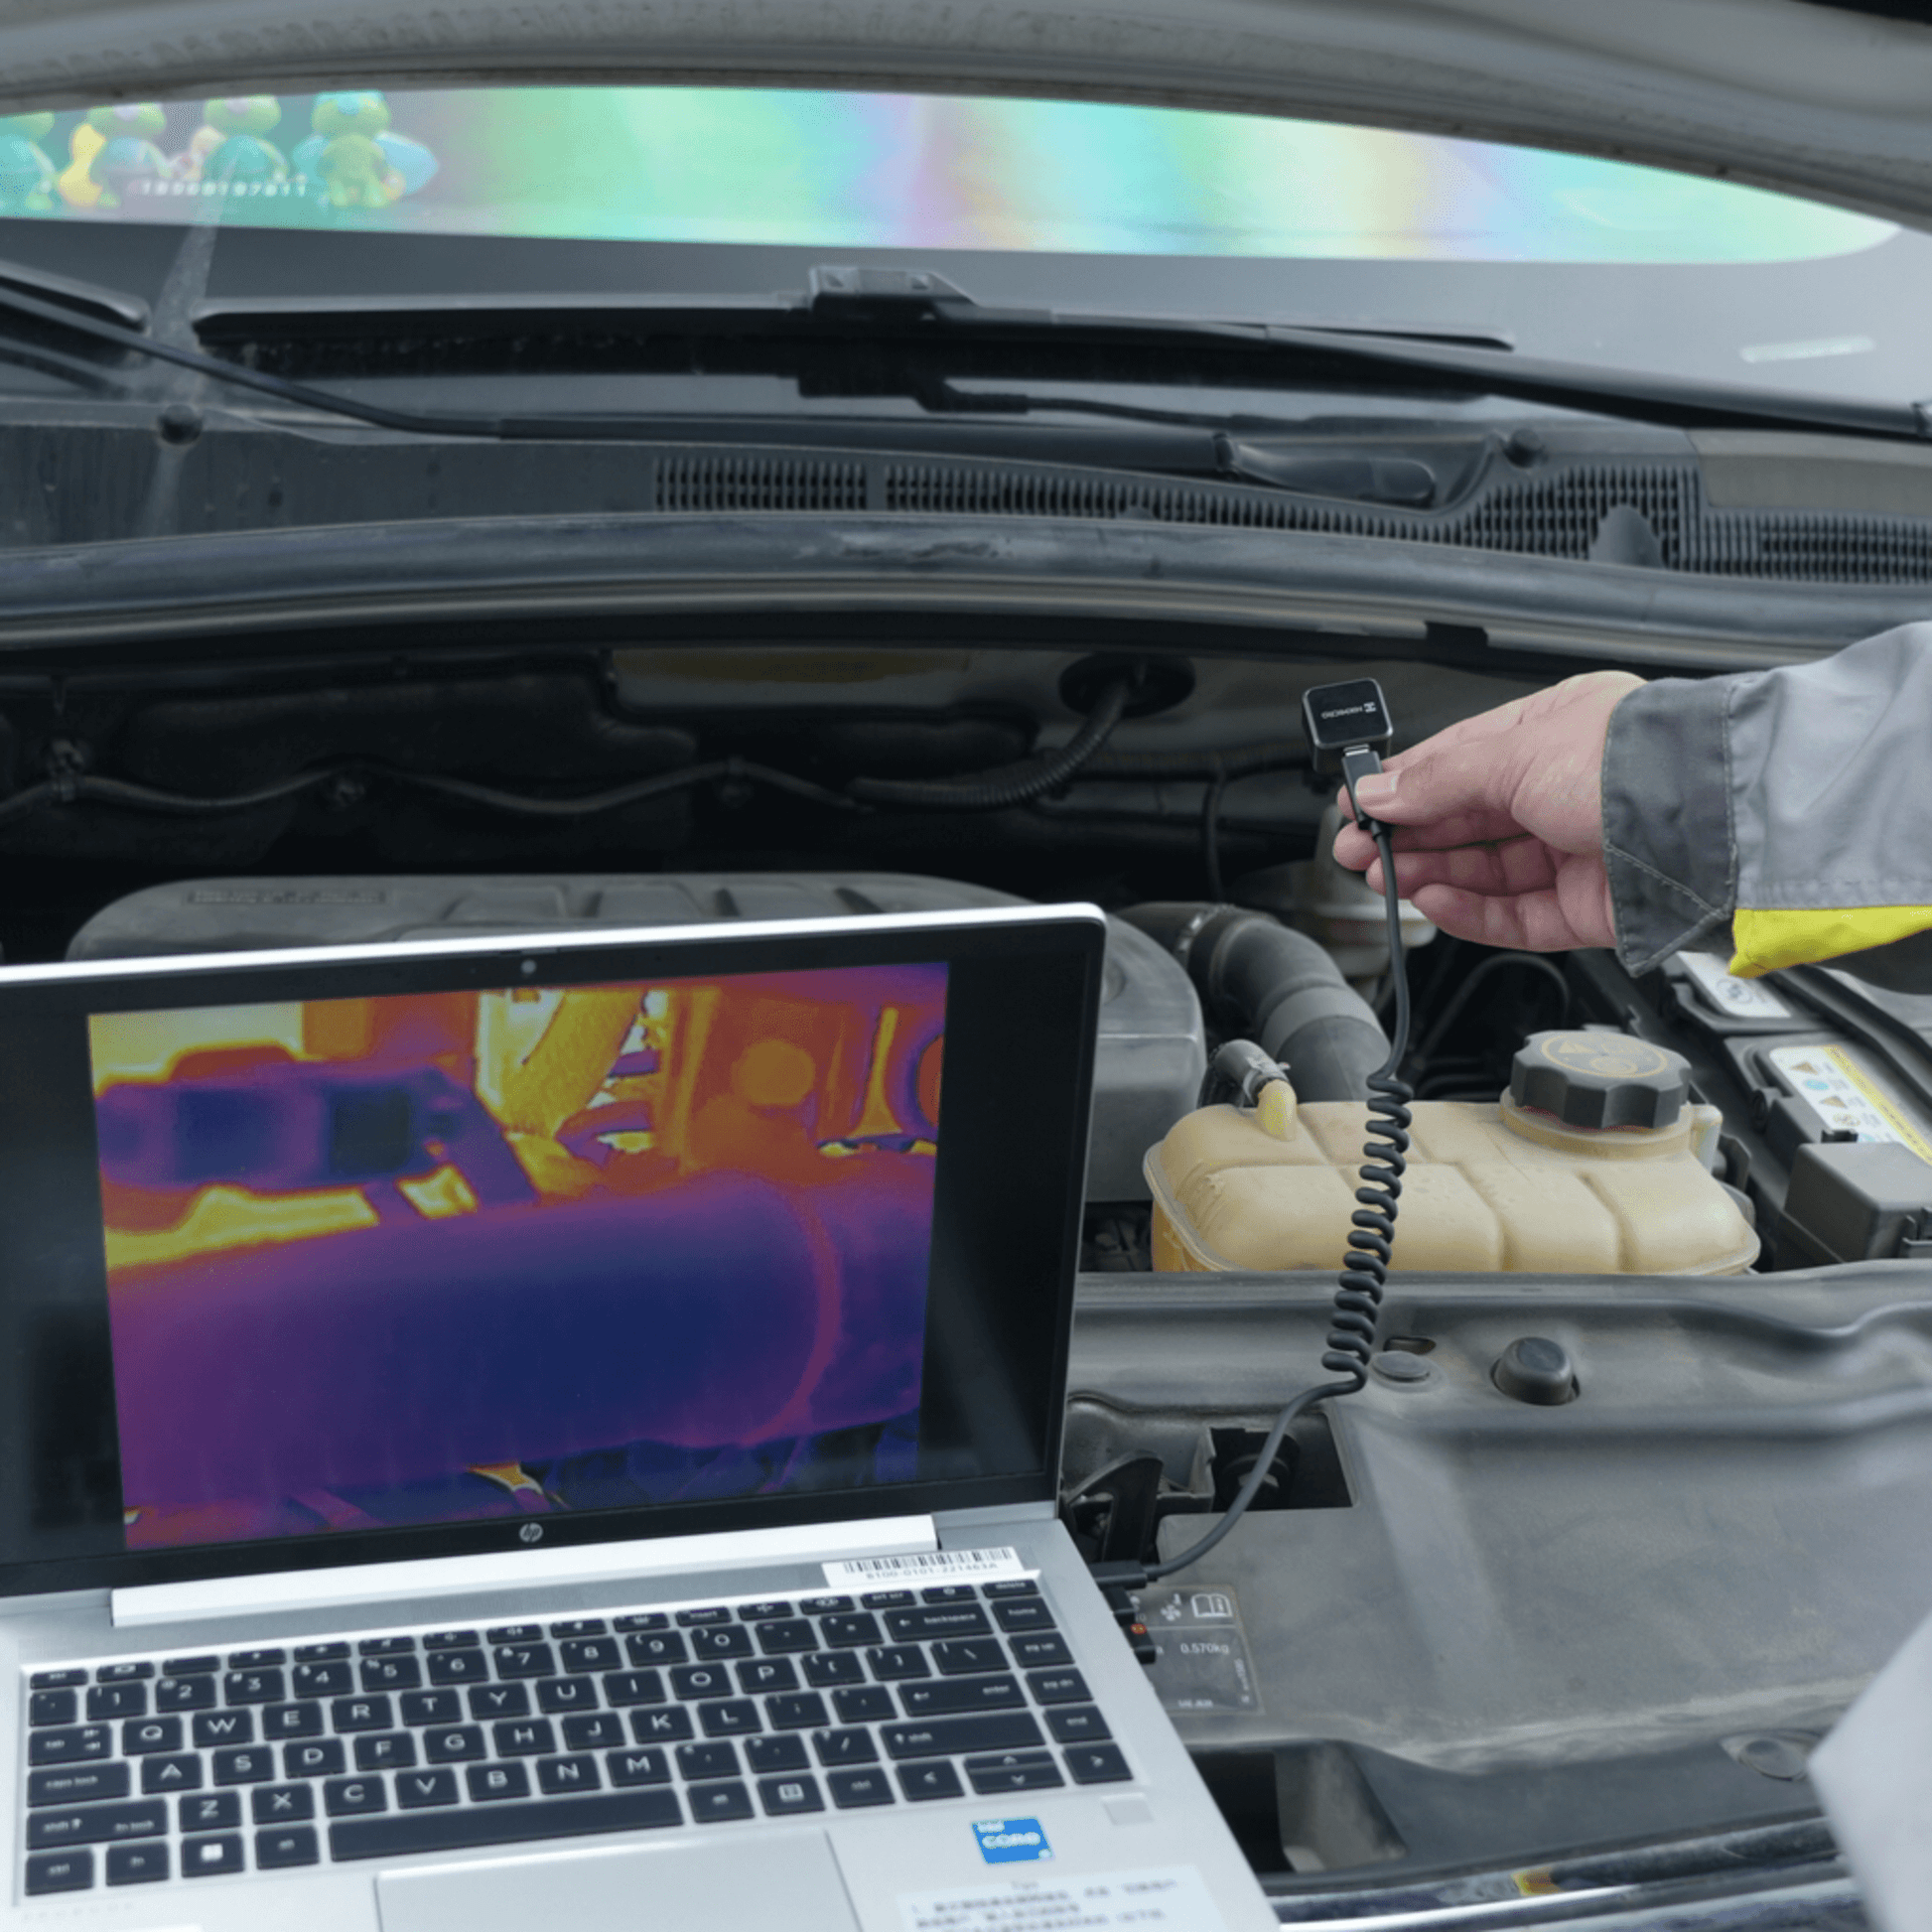 Engine Inspection with HikMicro Mini2Plus Android Thermal Camera connected to PC USB